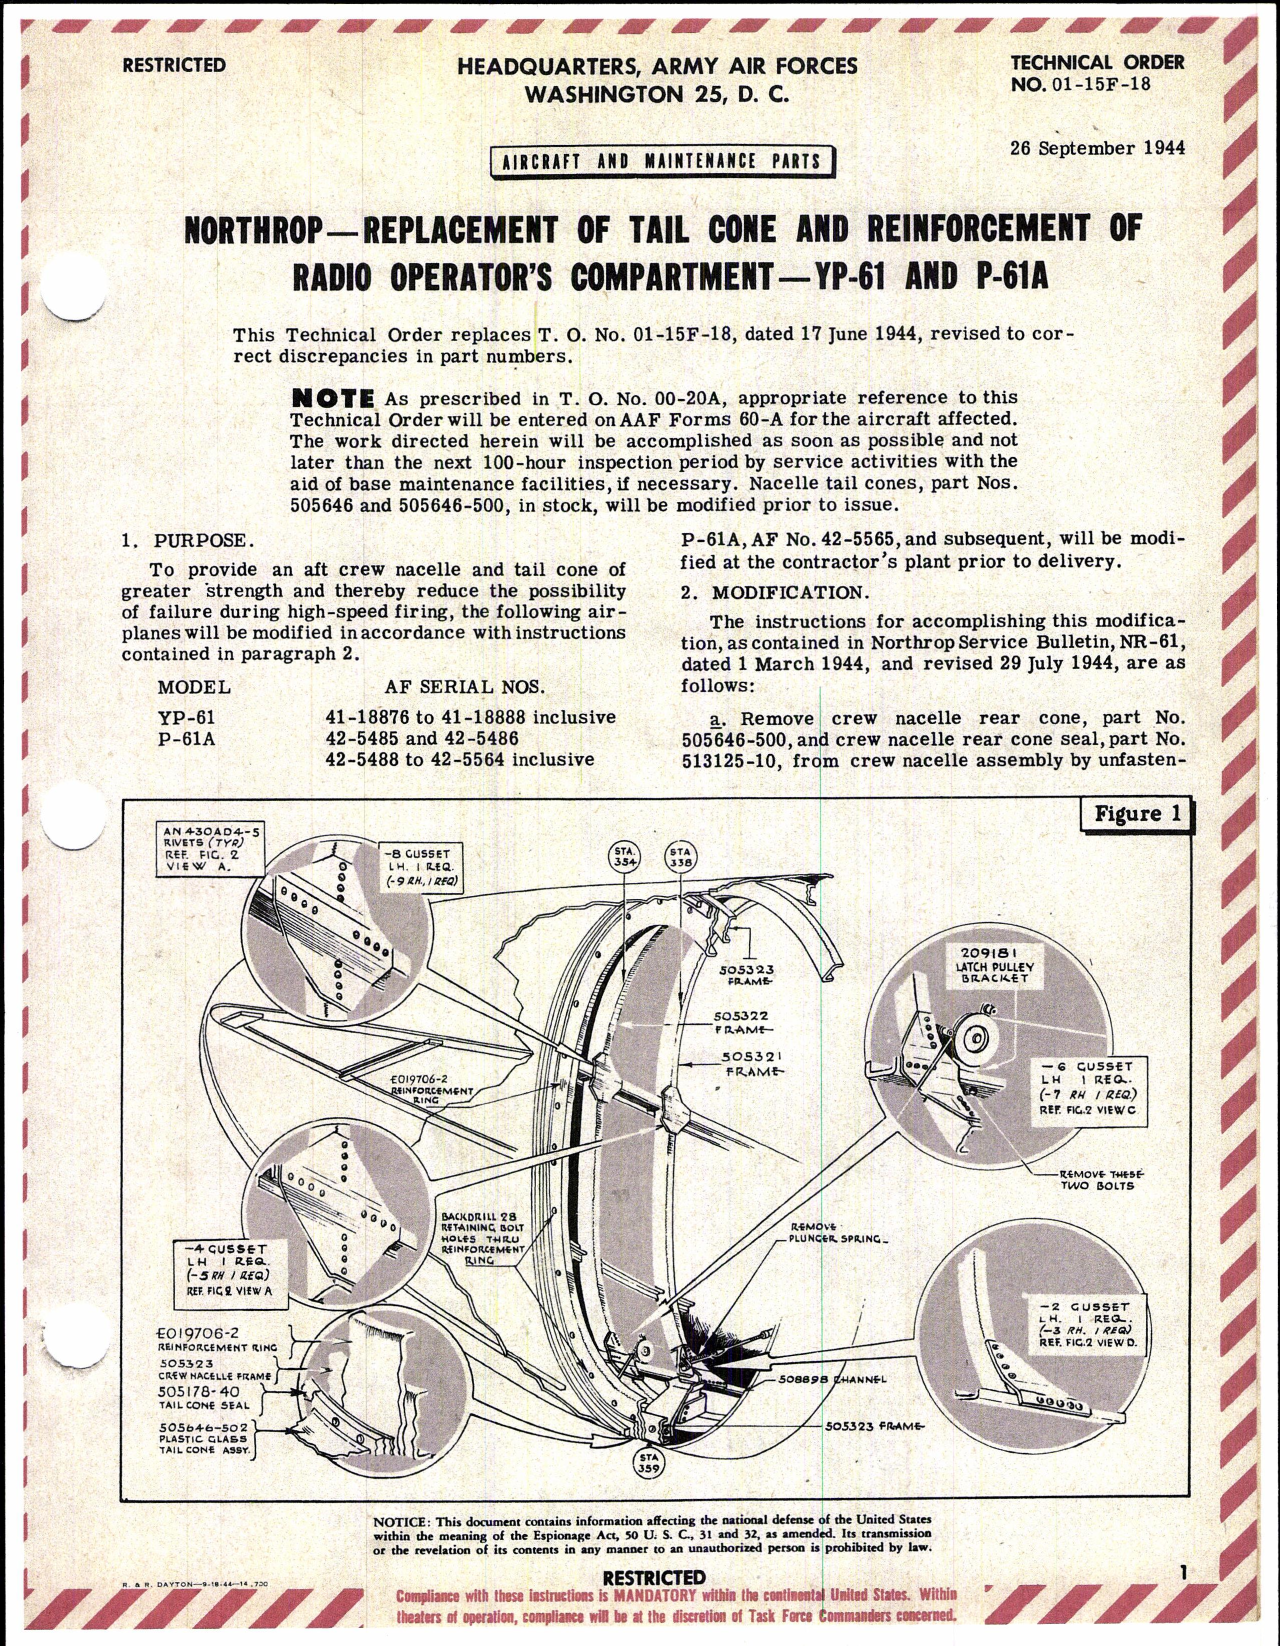 Sample page 1 from AirCorps Library document: Replacement of Tail Cone & Reinforcement of Radio Compartment